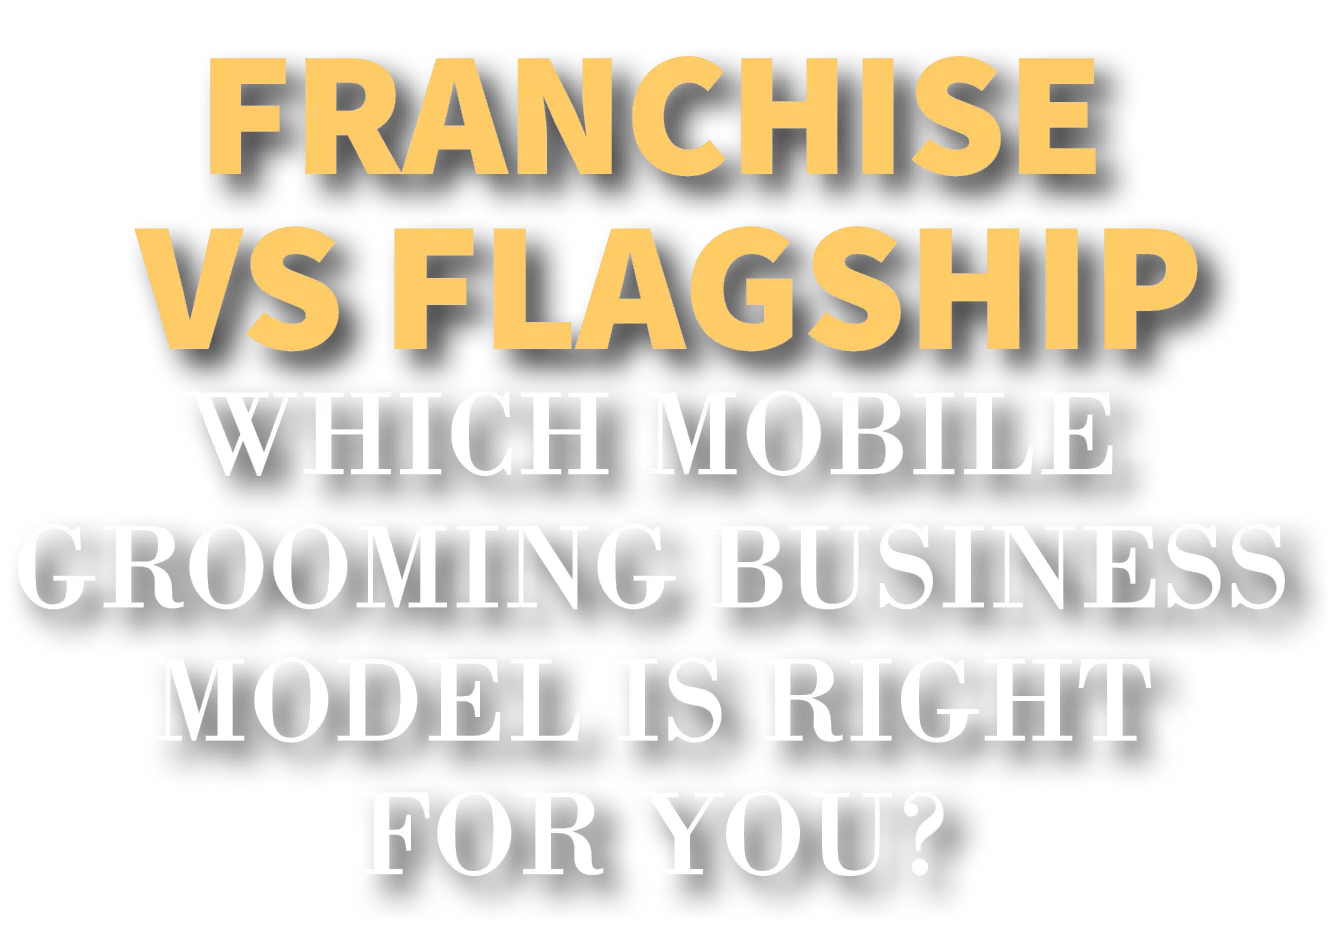 Franchise vs Flagship Which Mobile Grooming Model is right for you?